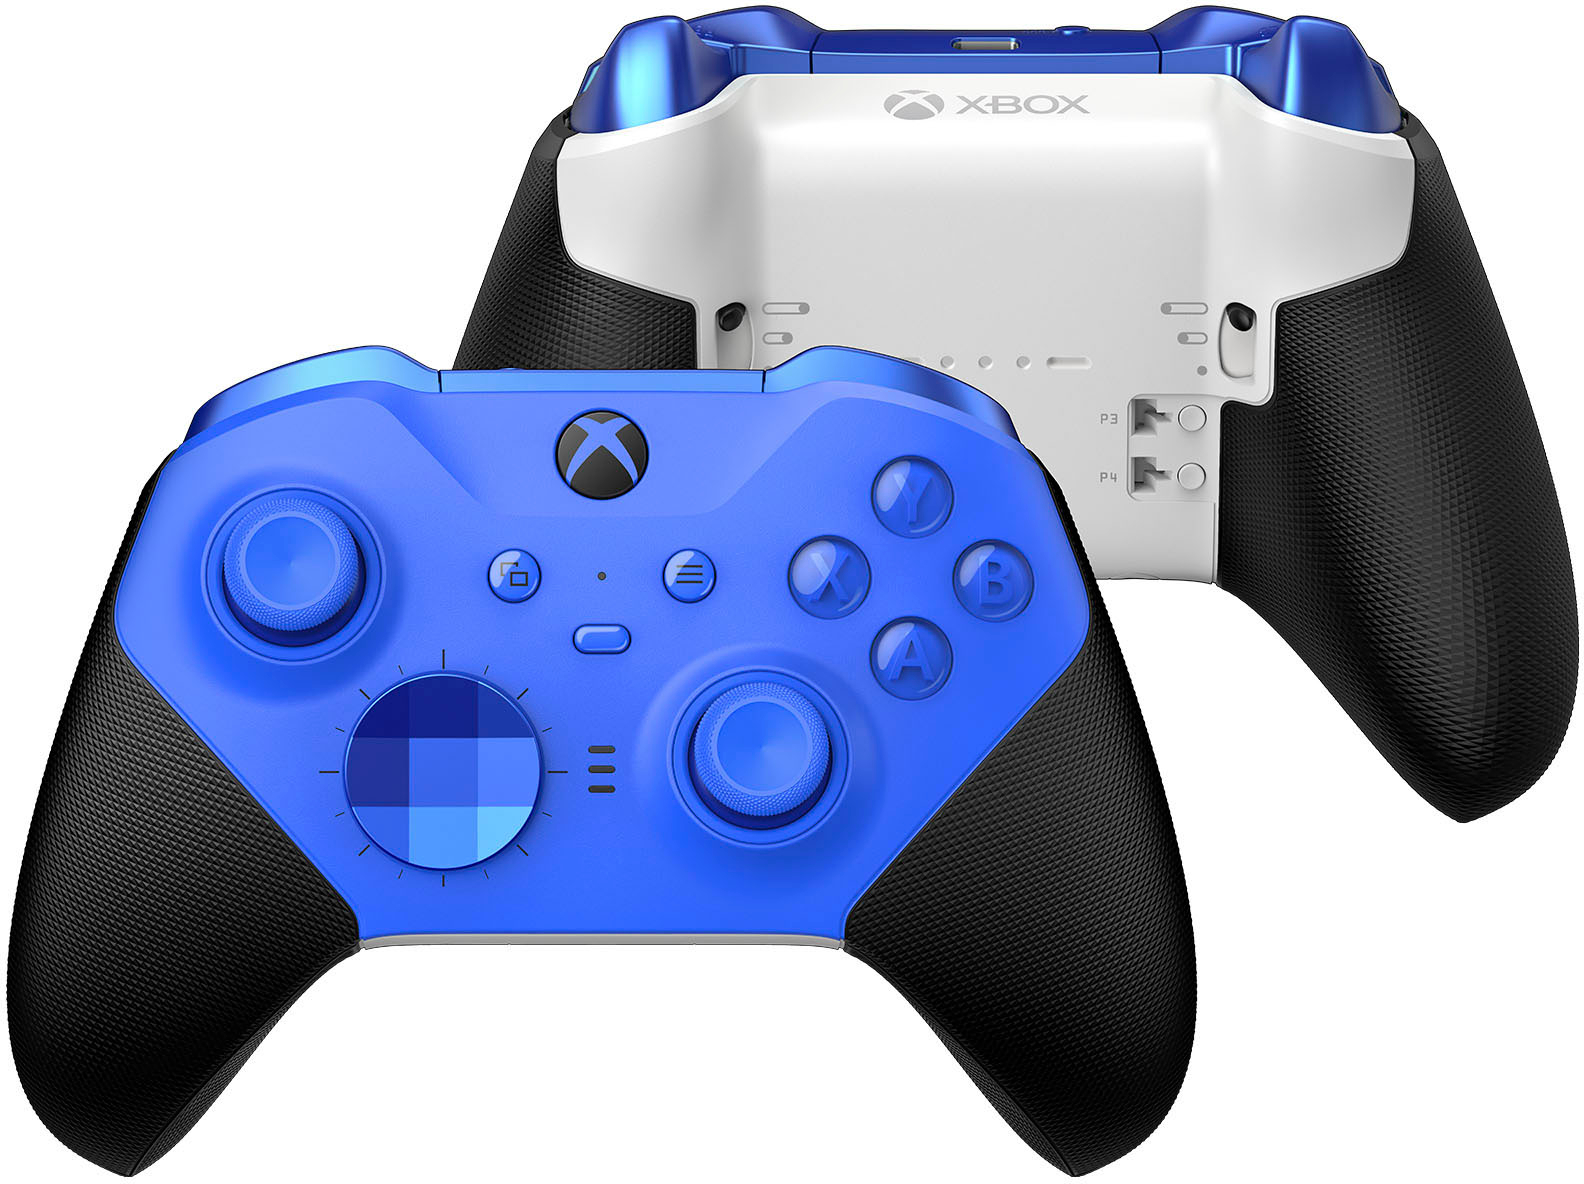 Microsoft Elite Series 2 Core Wireless Controller for Xbox Series X, Xbox  Series S, Xbox One, and Windows PCs Blue RFZ-00017 - Best Buy